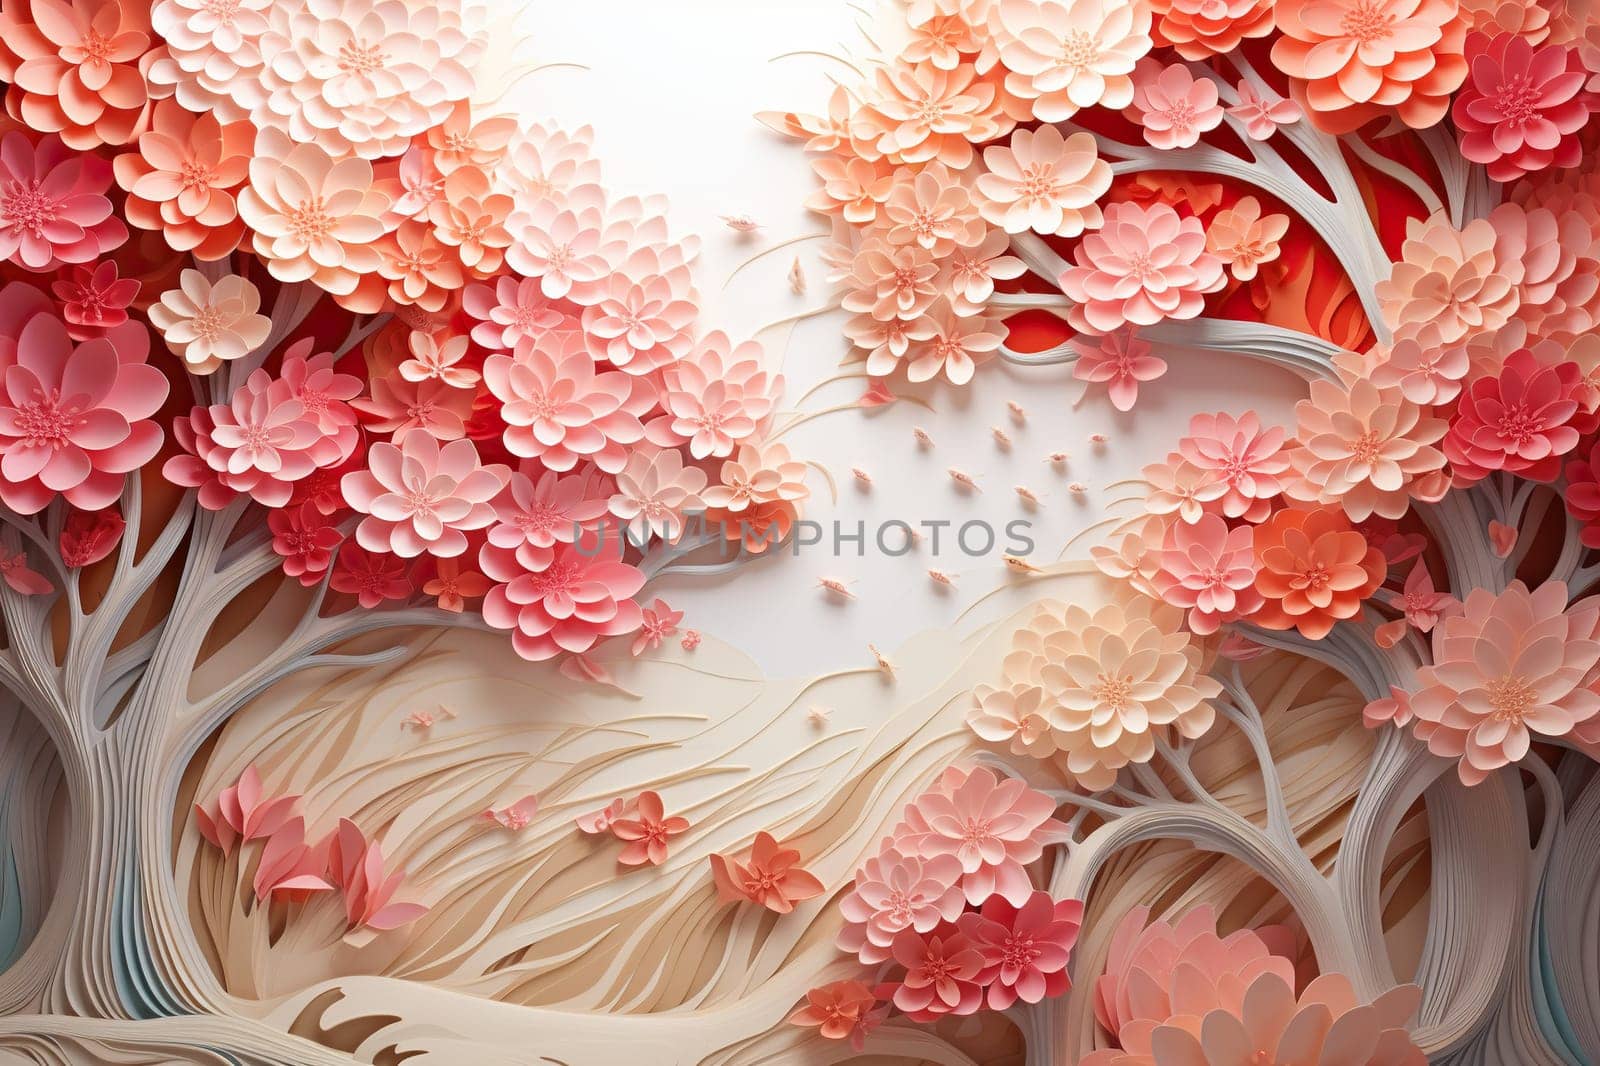 Landscape in cut paper style. Paper 3D landscape with trees and flowers in pastel colors.